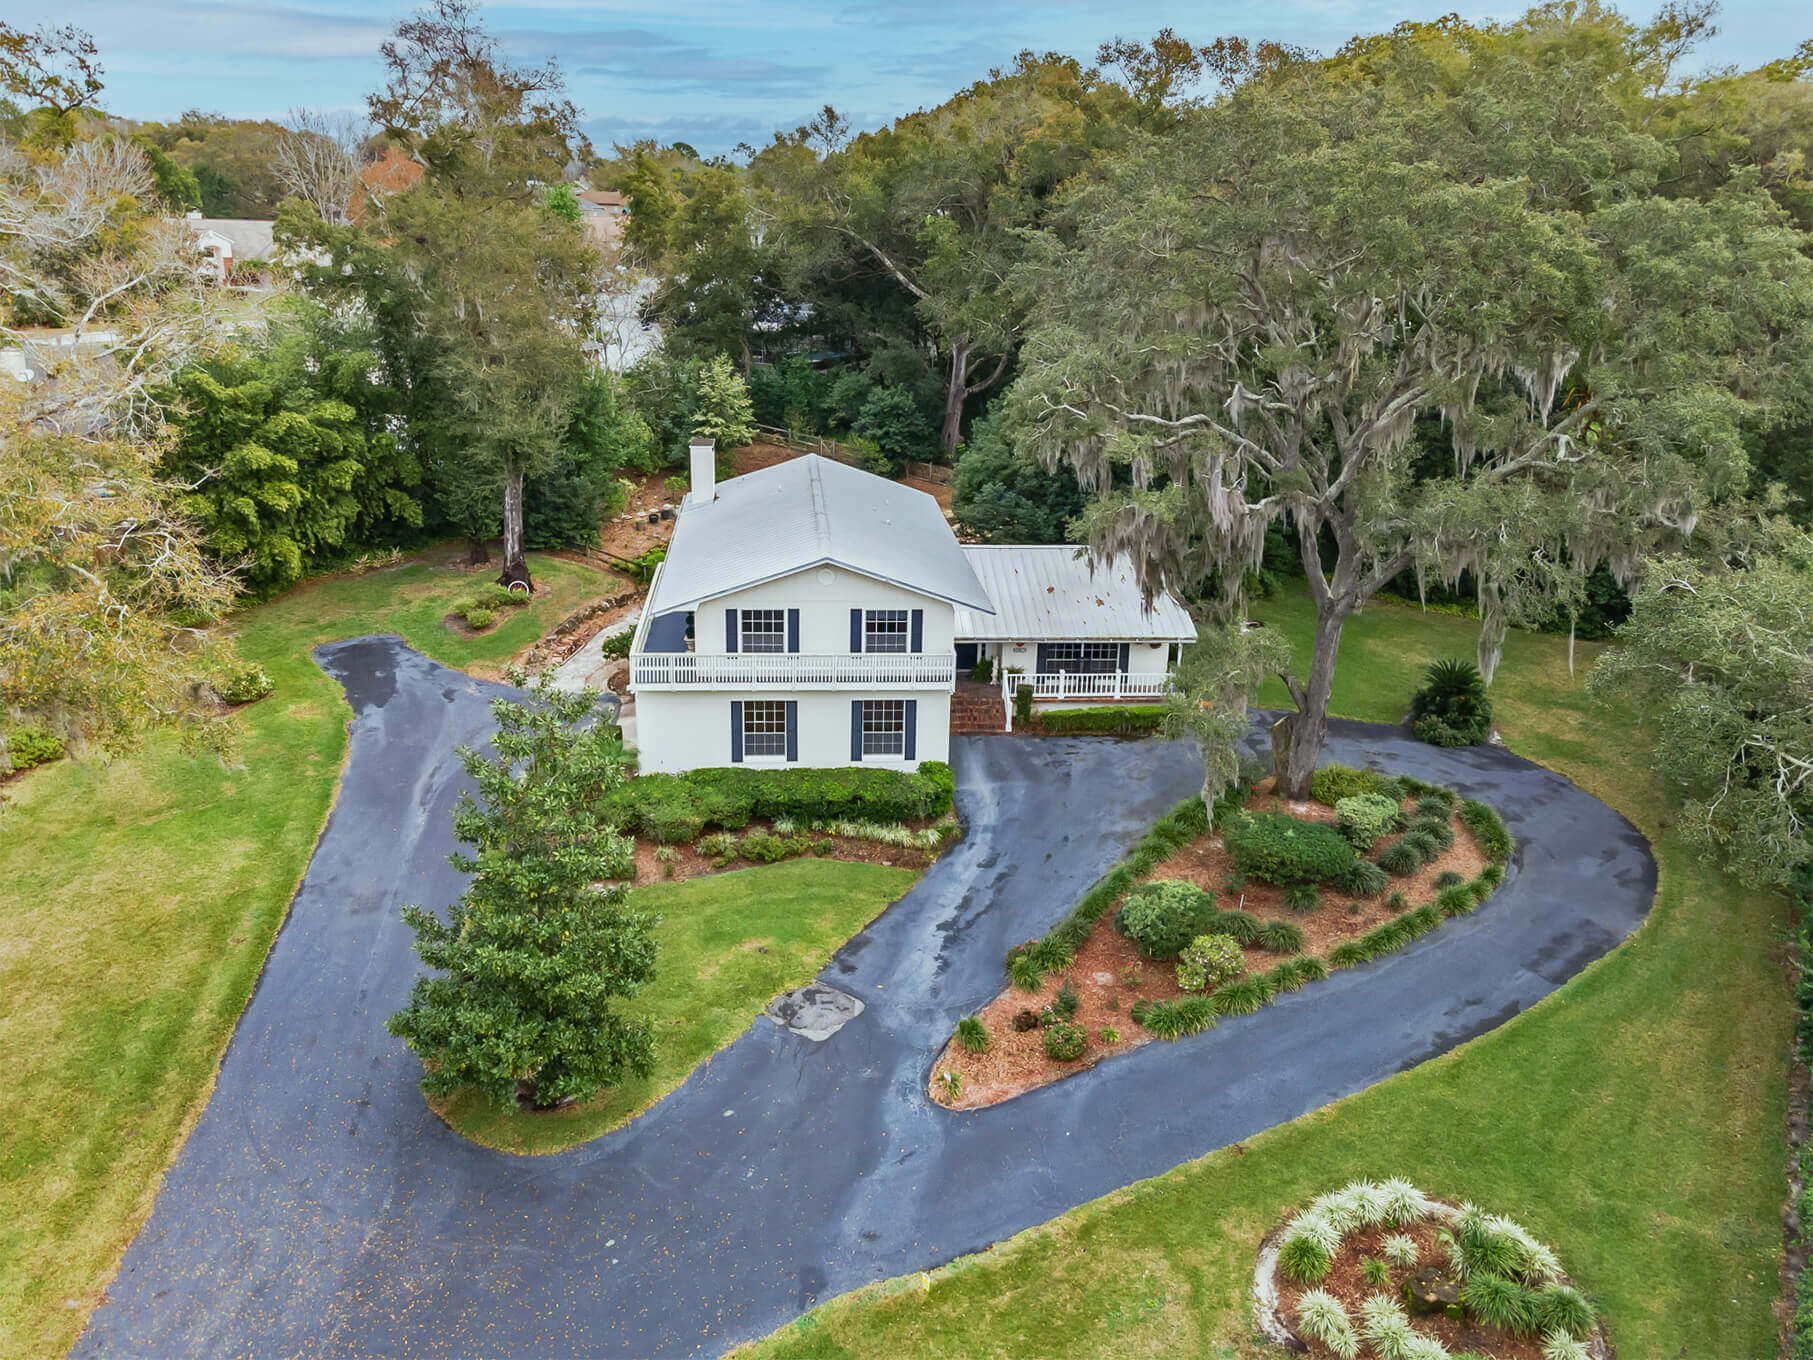 Arial drone photograph of a two story home surrounded by tall trees and a winding driveway.